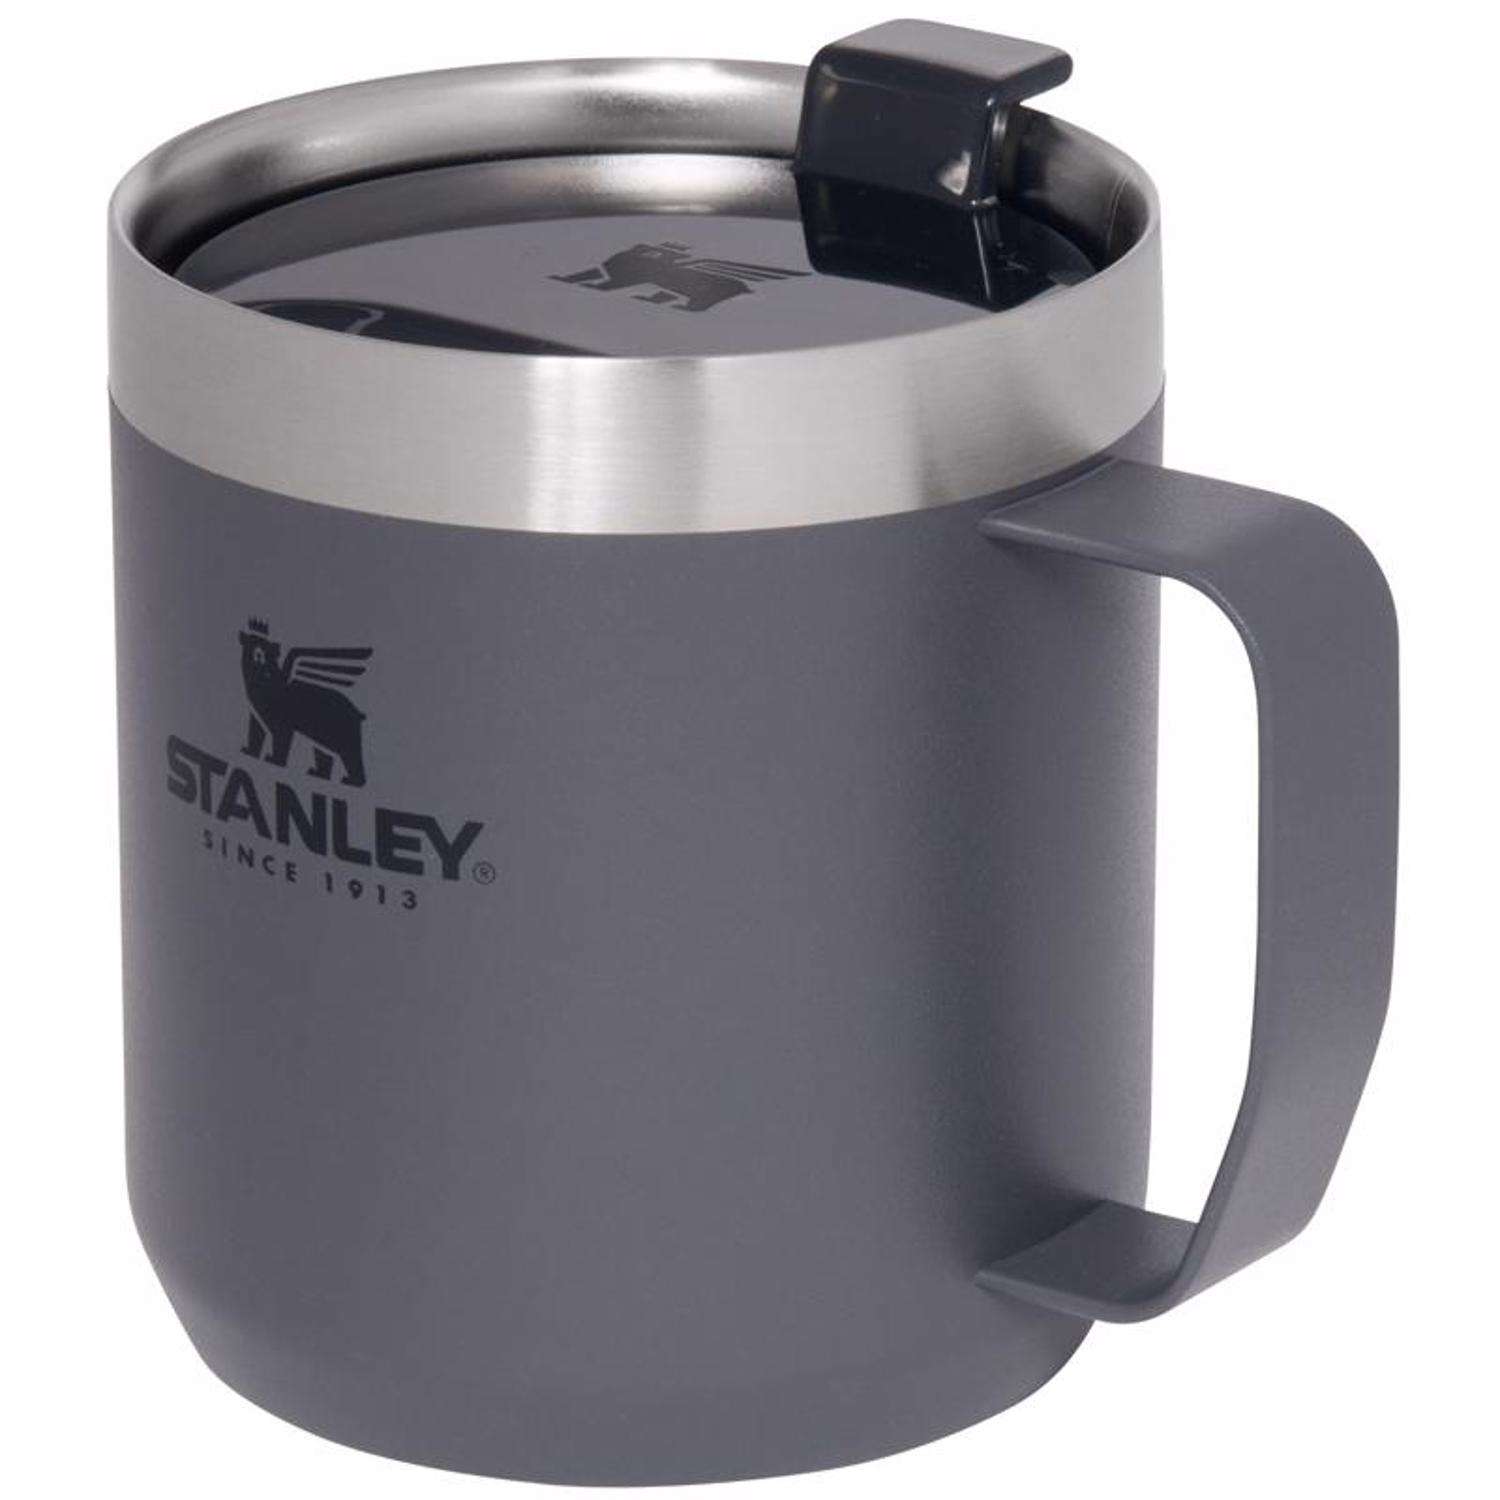 Stanley 12oz Travel Mug: Perfect For On-The-Go Sipping